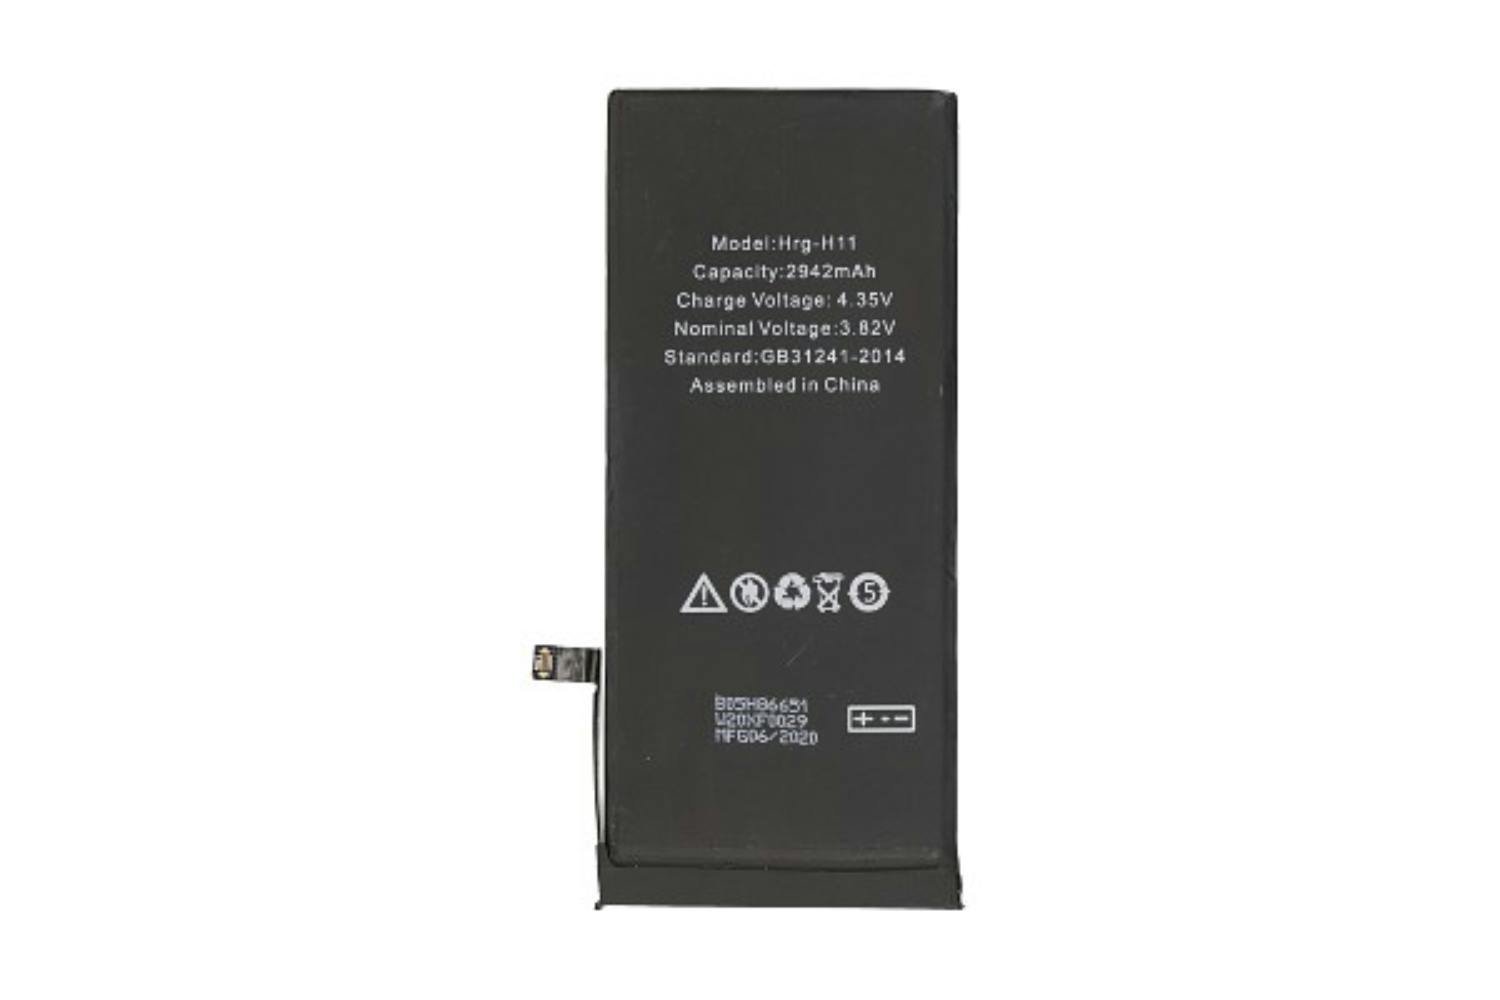 2-Power MBI0209AW 2942mAh Replacement iPhone Battery